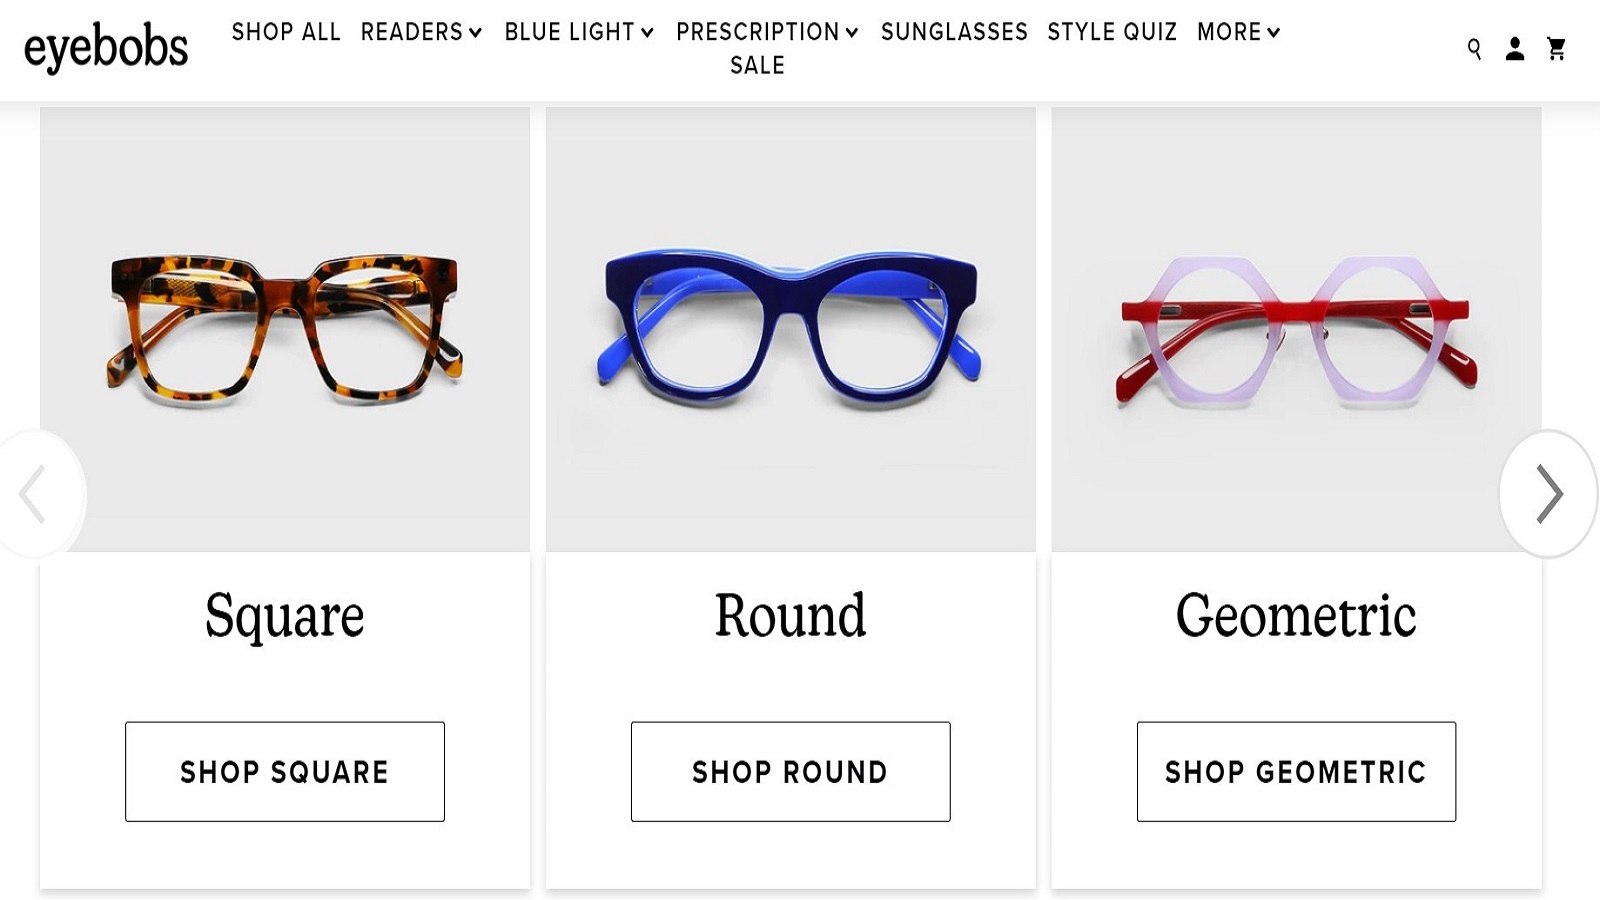 Eyebobs Readers Review: Offer Fashion Items at a Budget-Friendly Price